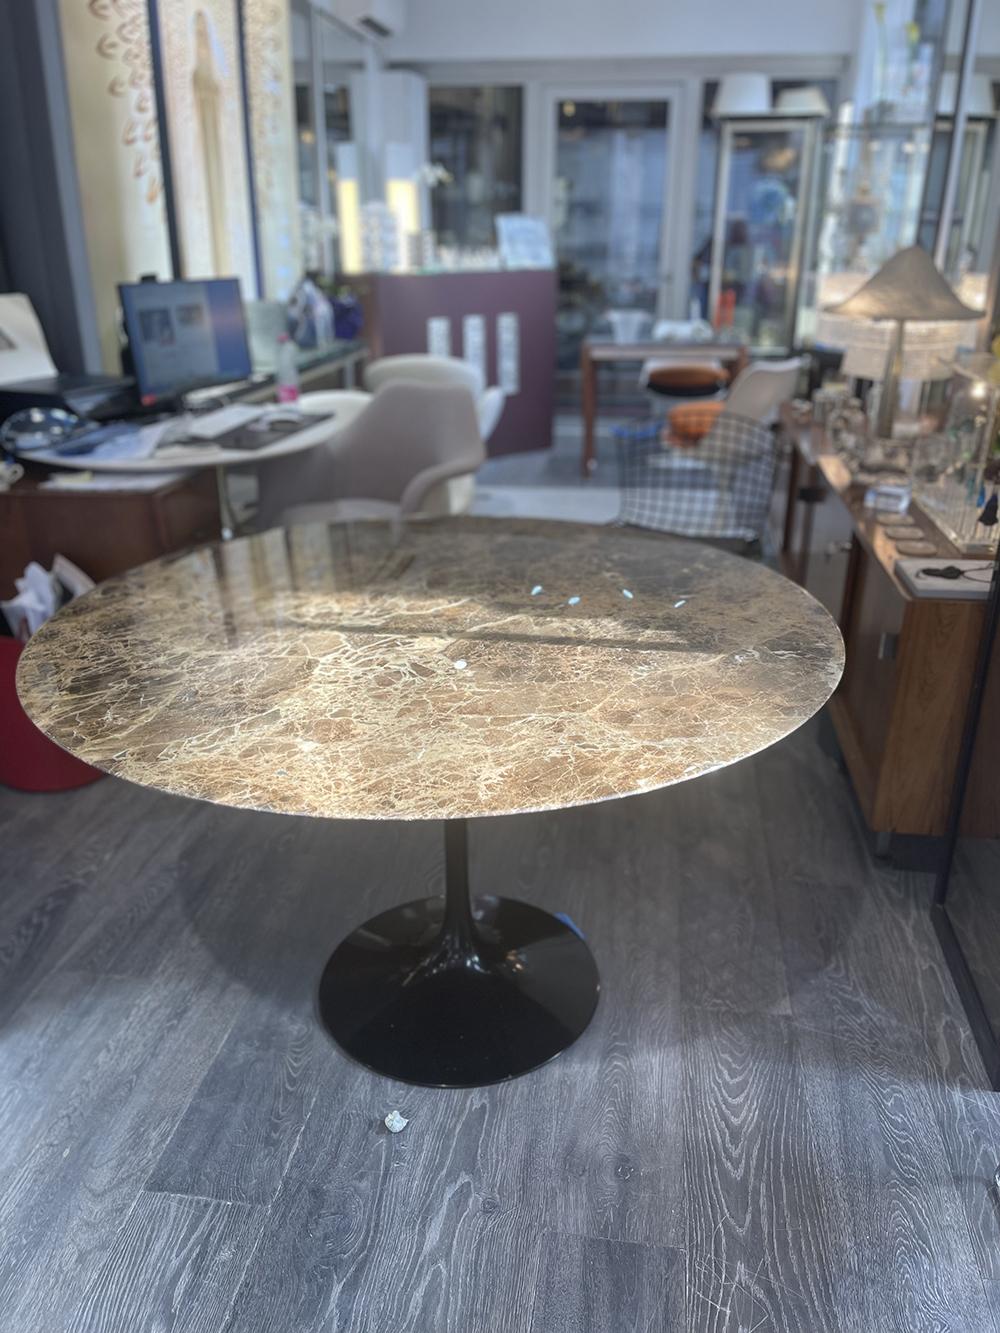 Eero SAARINEN for KNOLL International,
dining room table, tulip base in black lacquered cast aluminium, diameter 120 cm
Marble top: “Emperador”
Marked under the base.
Size:
Diameter: 120 cm
Height: 72 cm

More photos on request.
Worldwide